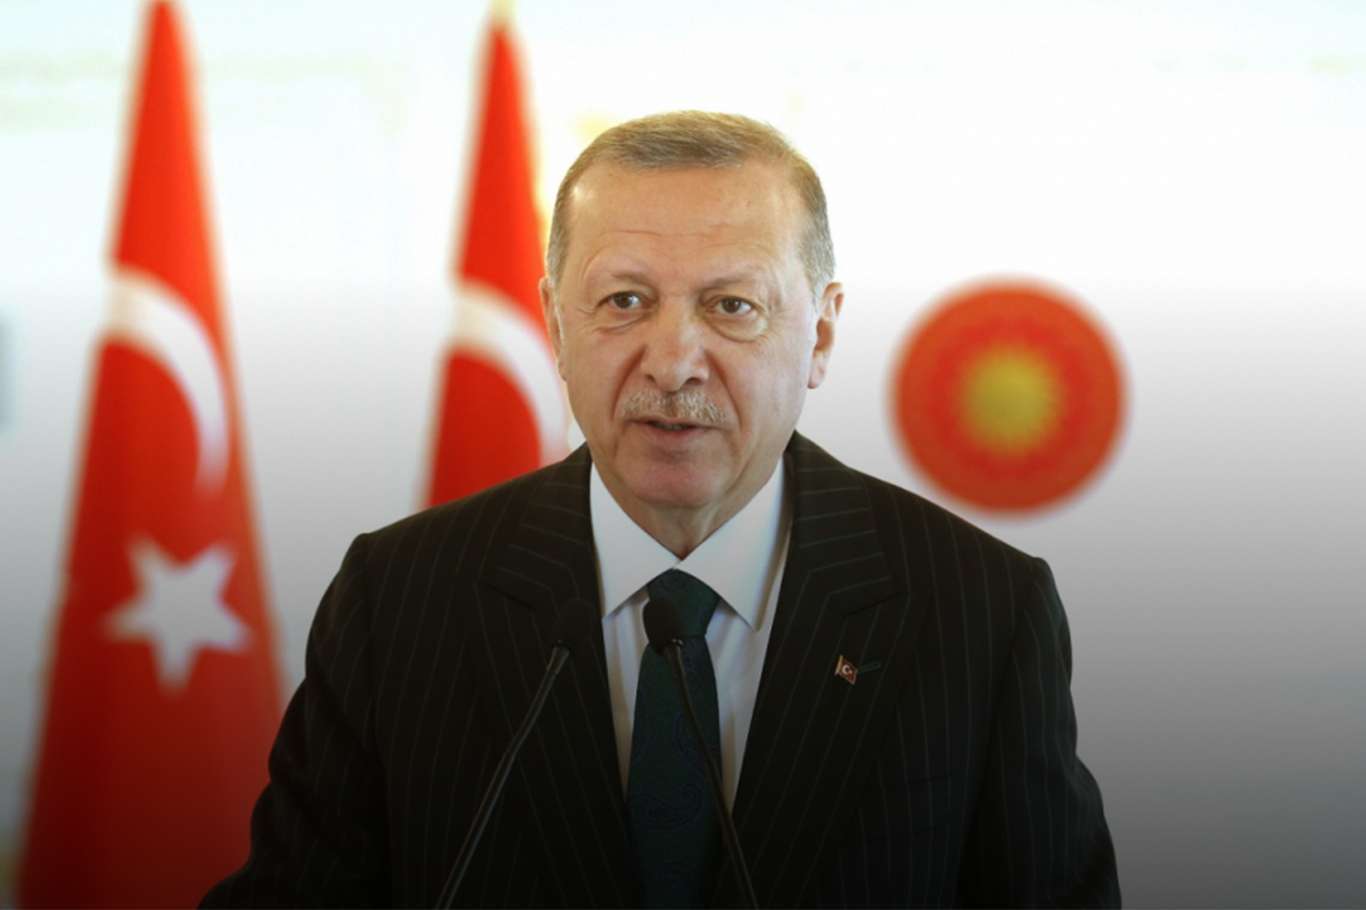 Erdoğan: Insulting the sacred has nothing to do with freedom